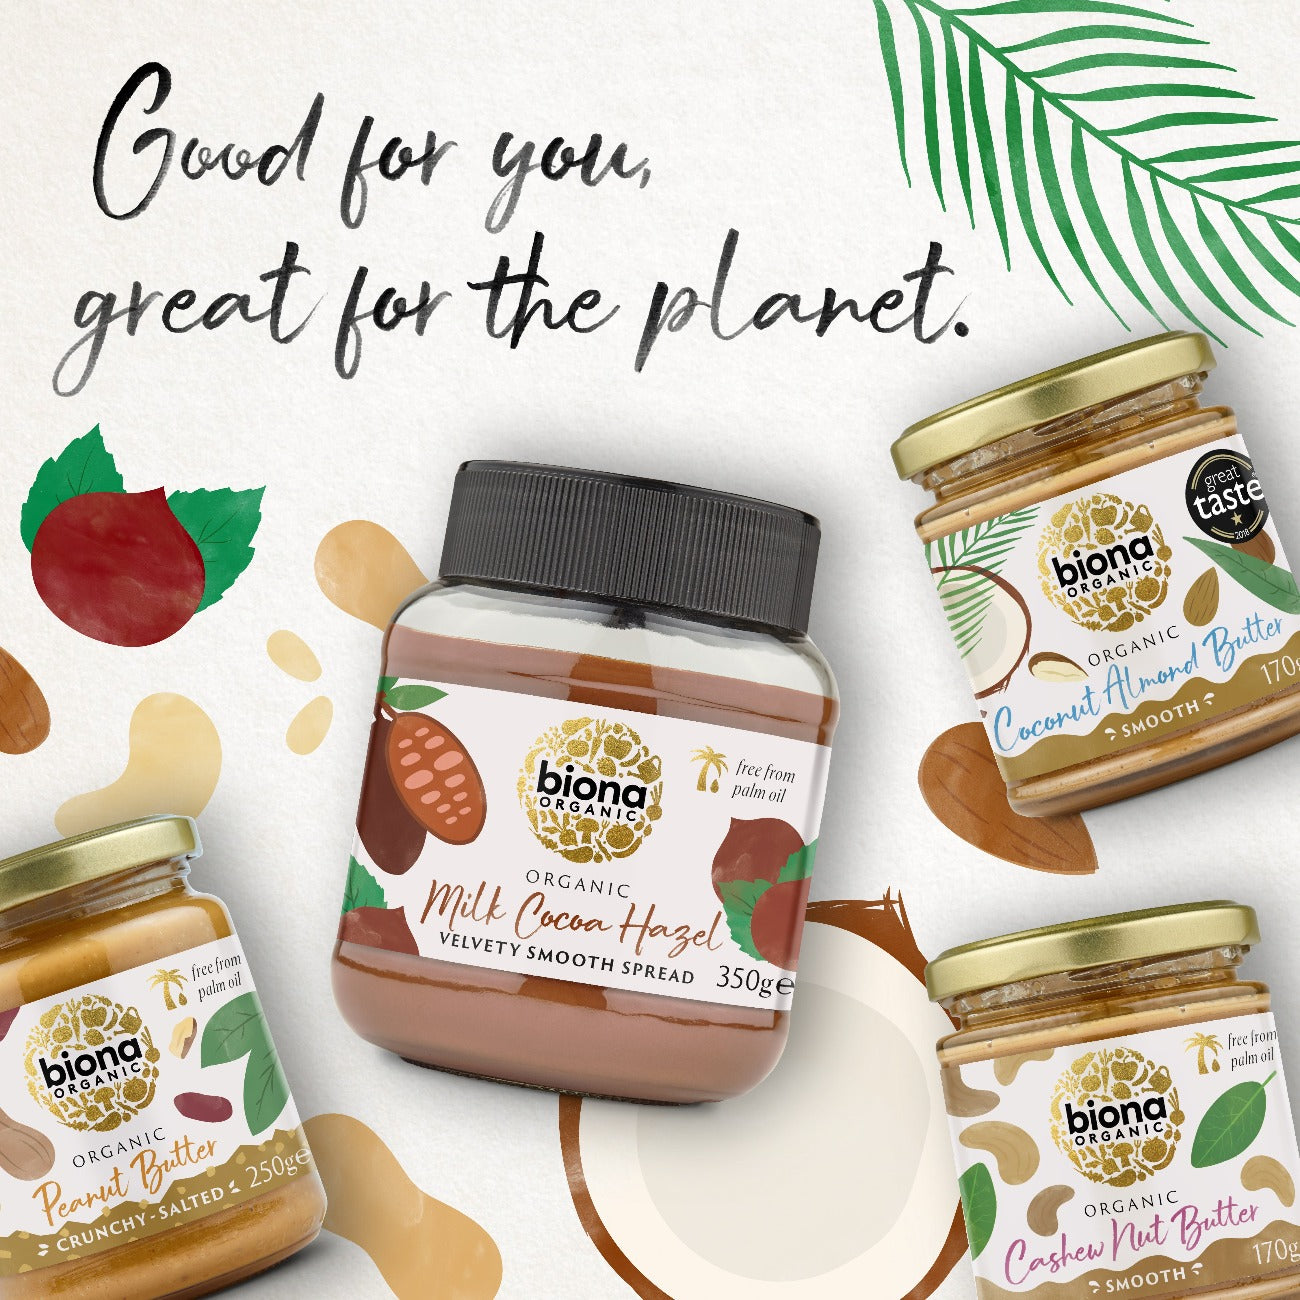 Coconut Almond Butter 170g